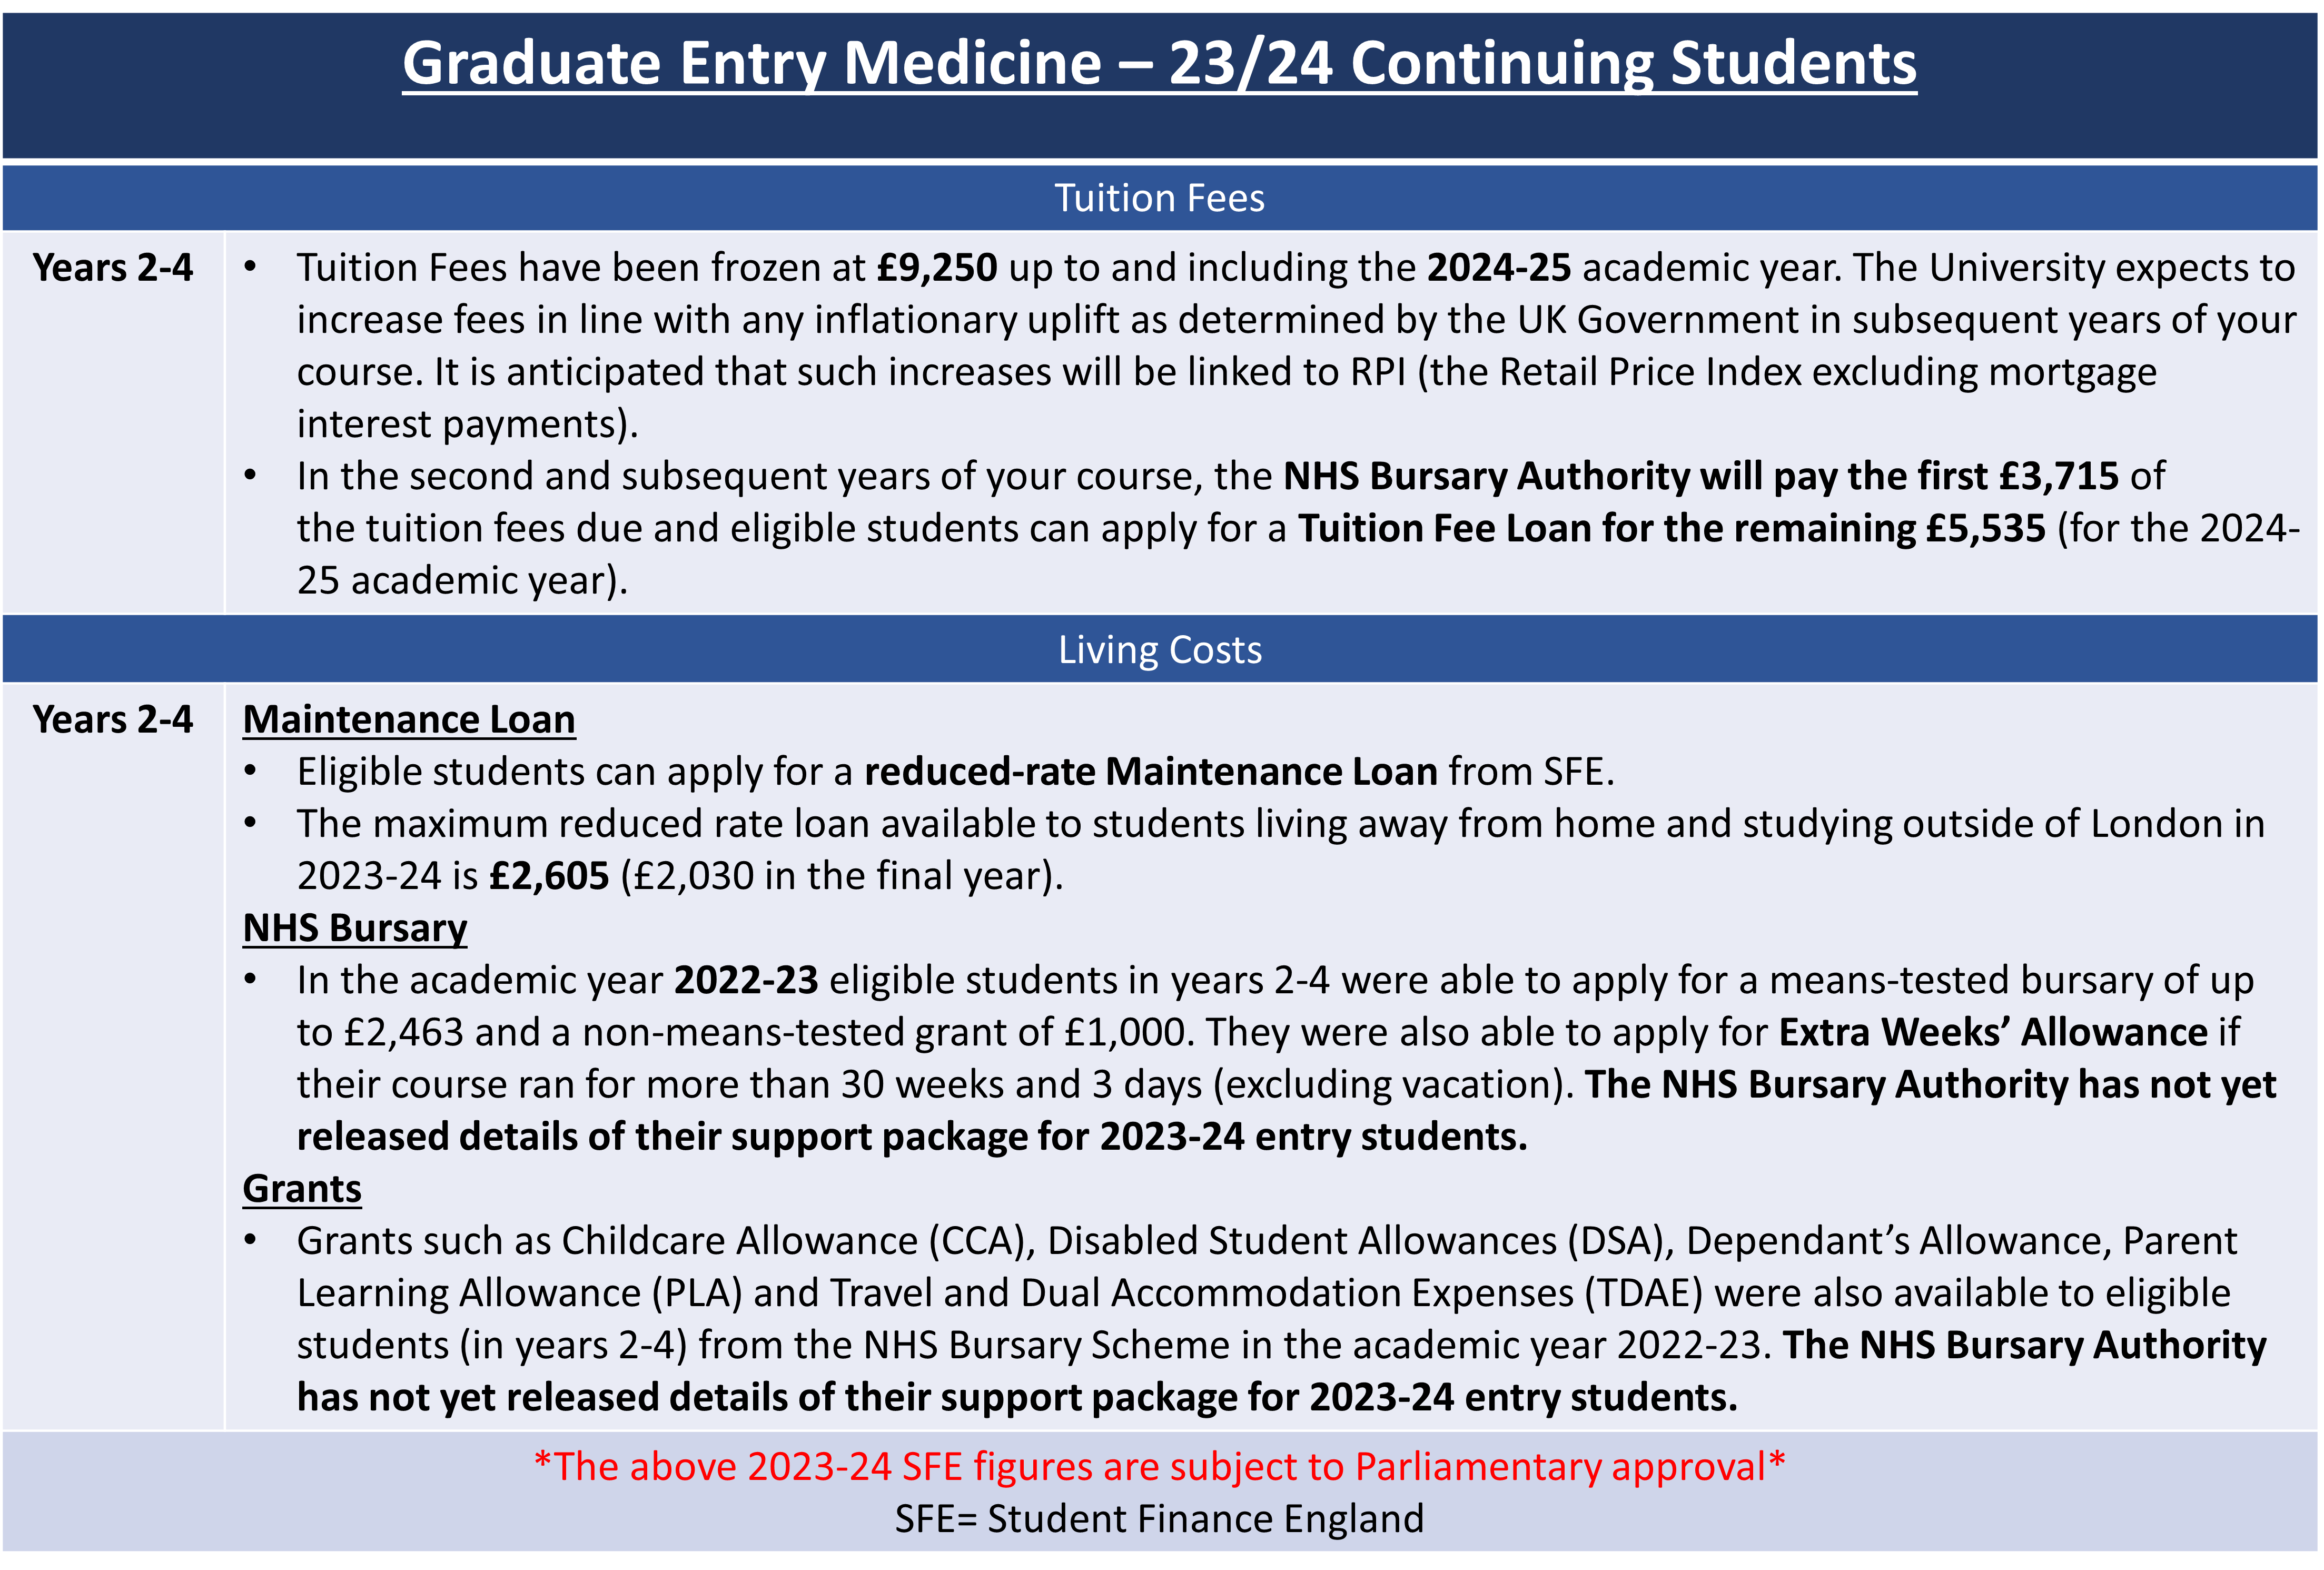 A table to demonstrate the tuition fees and financial support for the 2023-2024 academic year for graduate entry medicine (years 2-4). SFE figures subject to parliamentary approval.